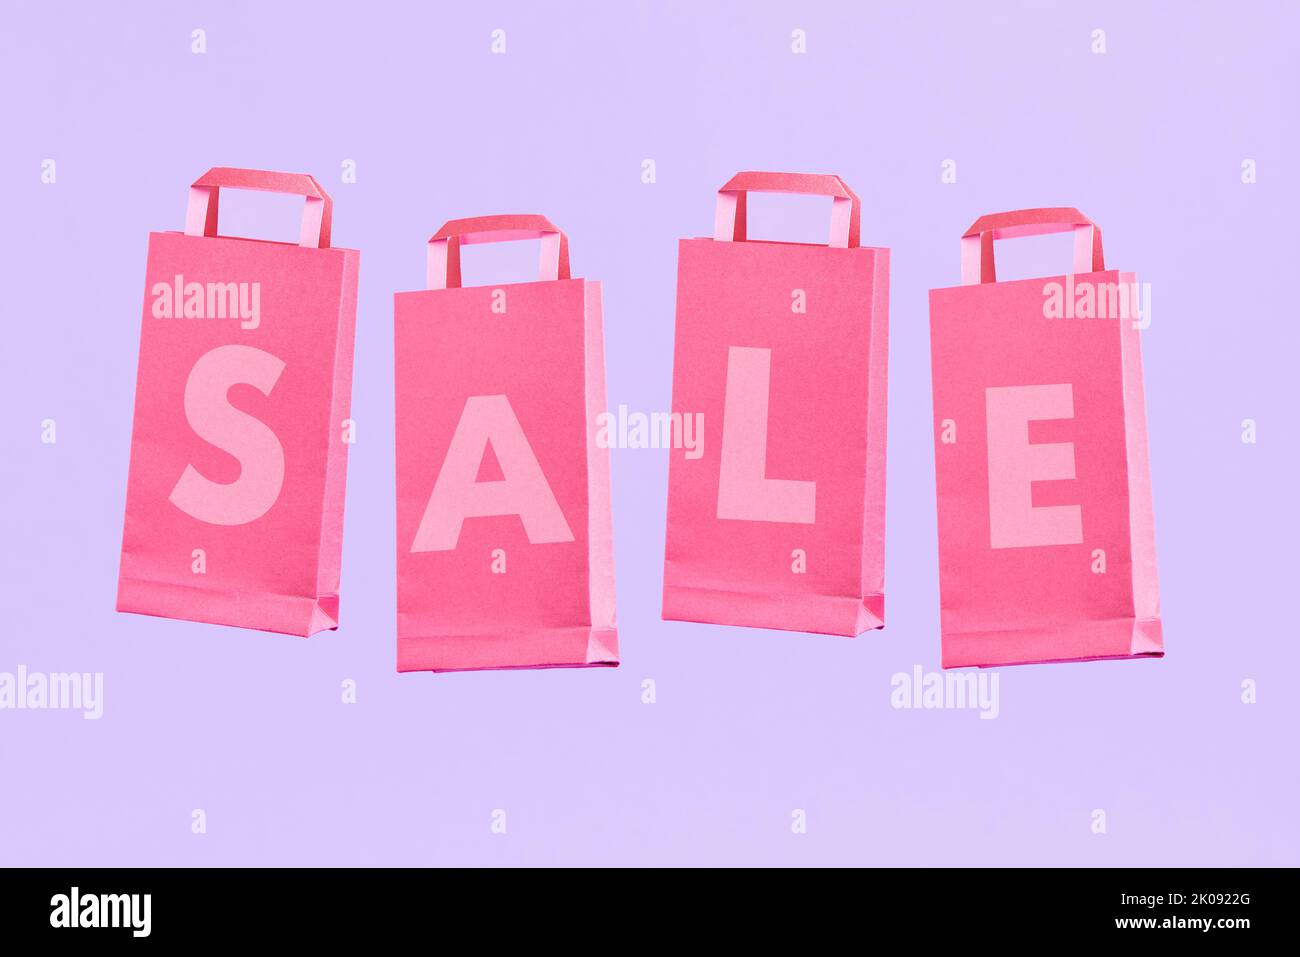 Word Sale written on a group of pink paper shopping bags, on a pastel lilac background. Minimalist trendy design with copy space. Stock Photo